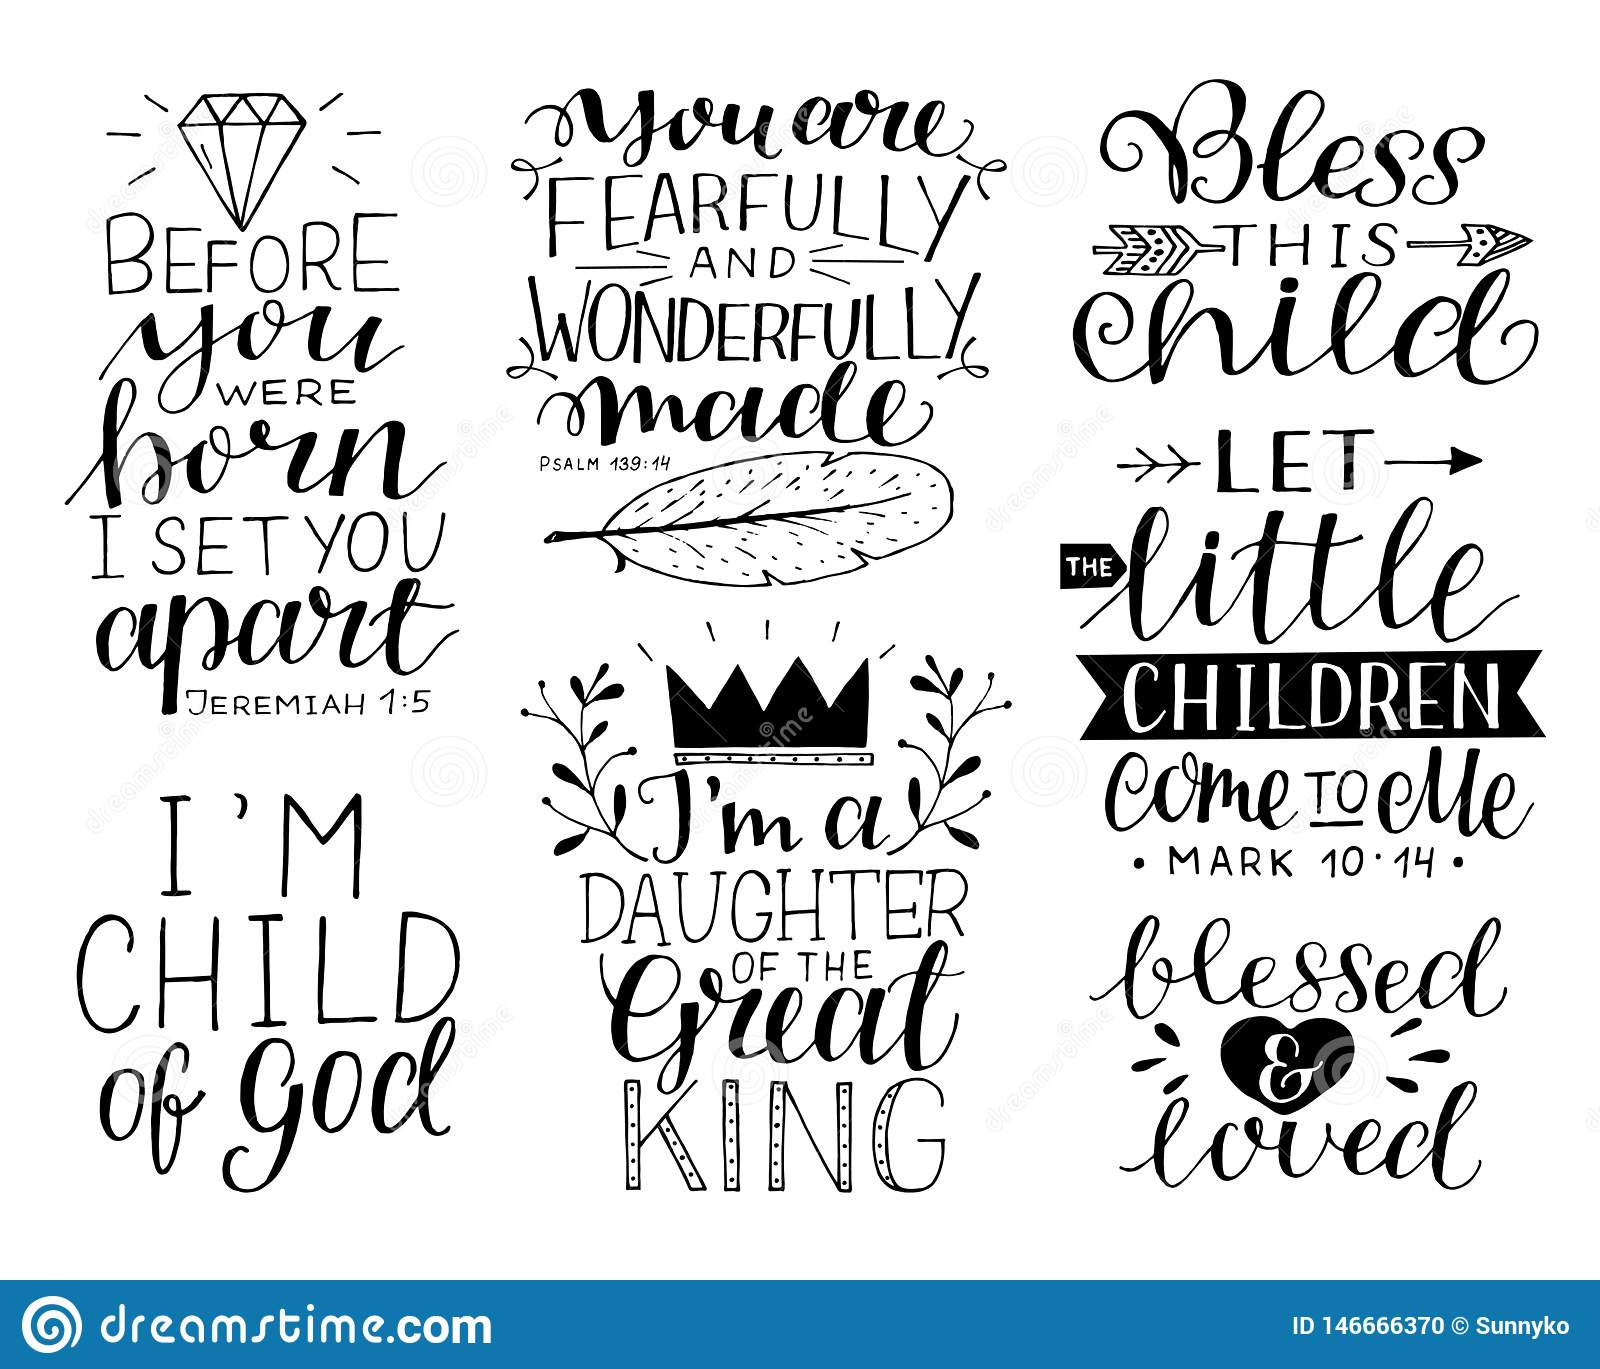 Kids Motivational Quotes From The Bible
 7 Hand lettering Motivational Bible Quotes For Kids And